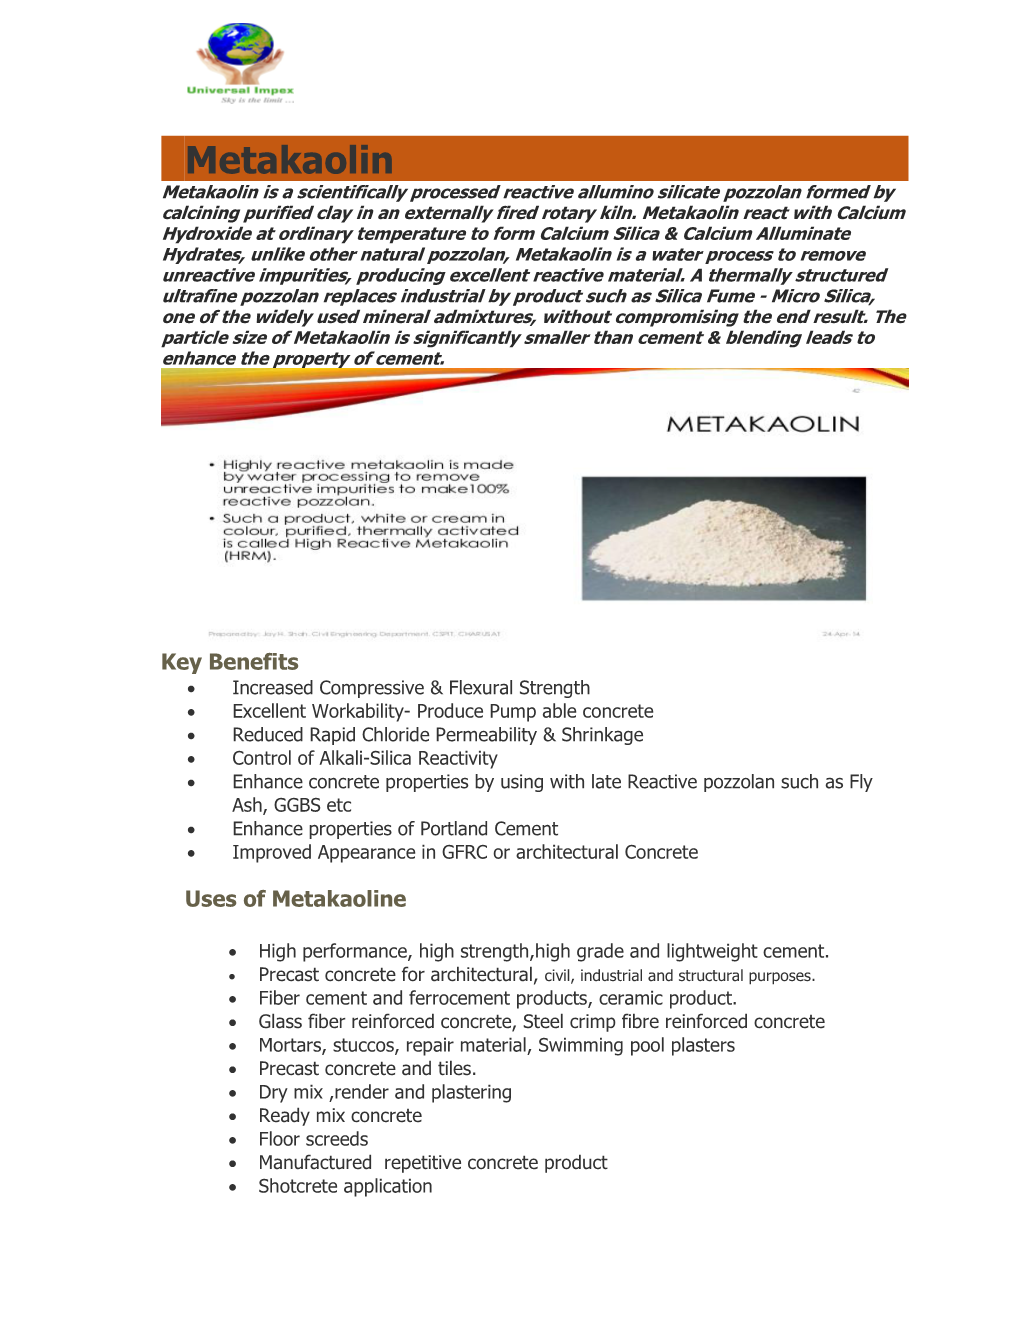 Metakaolin Metakaolin Is a Scientifically Processed Reactive Allumino Silicate Pozzolan Formed by Calcining Purified Clay in an Externally Fired Rotary Kiln